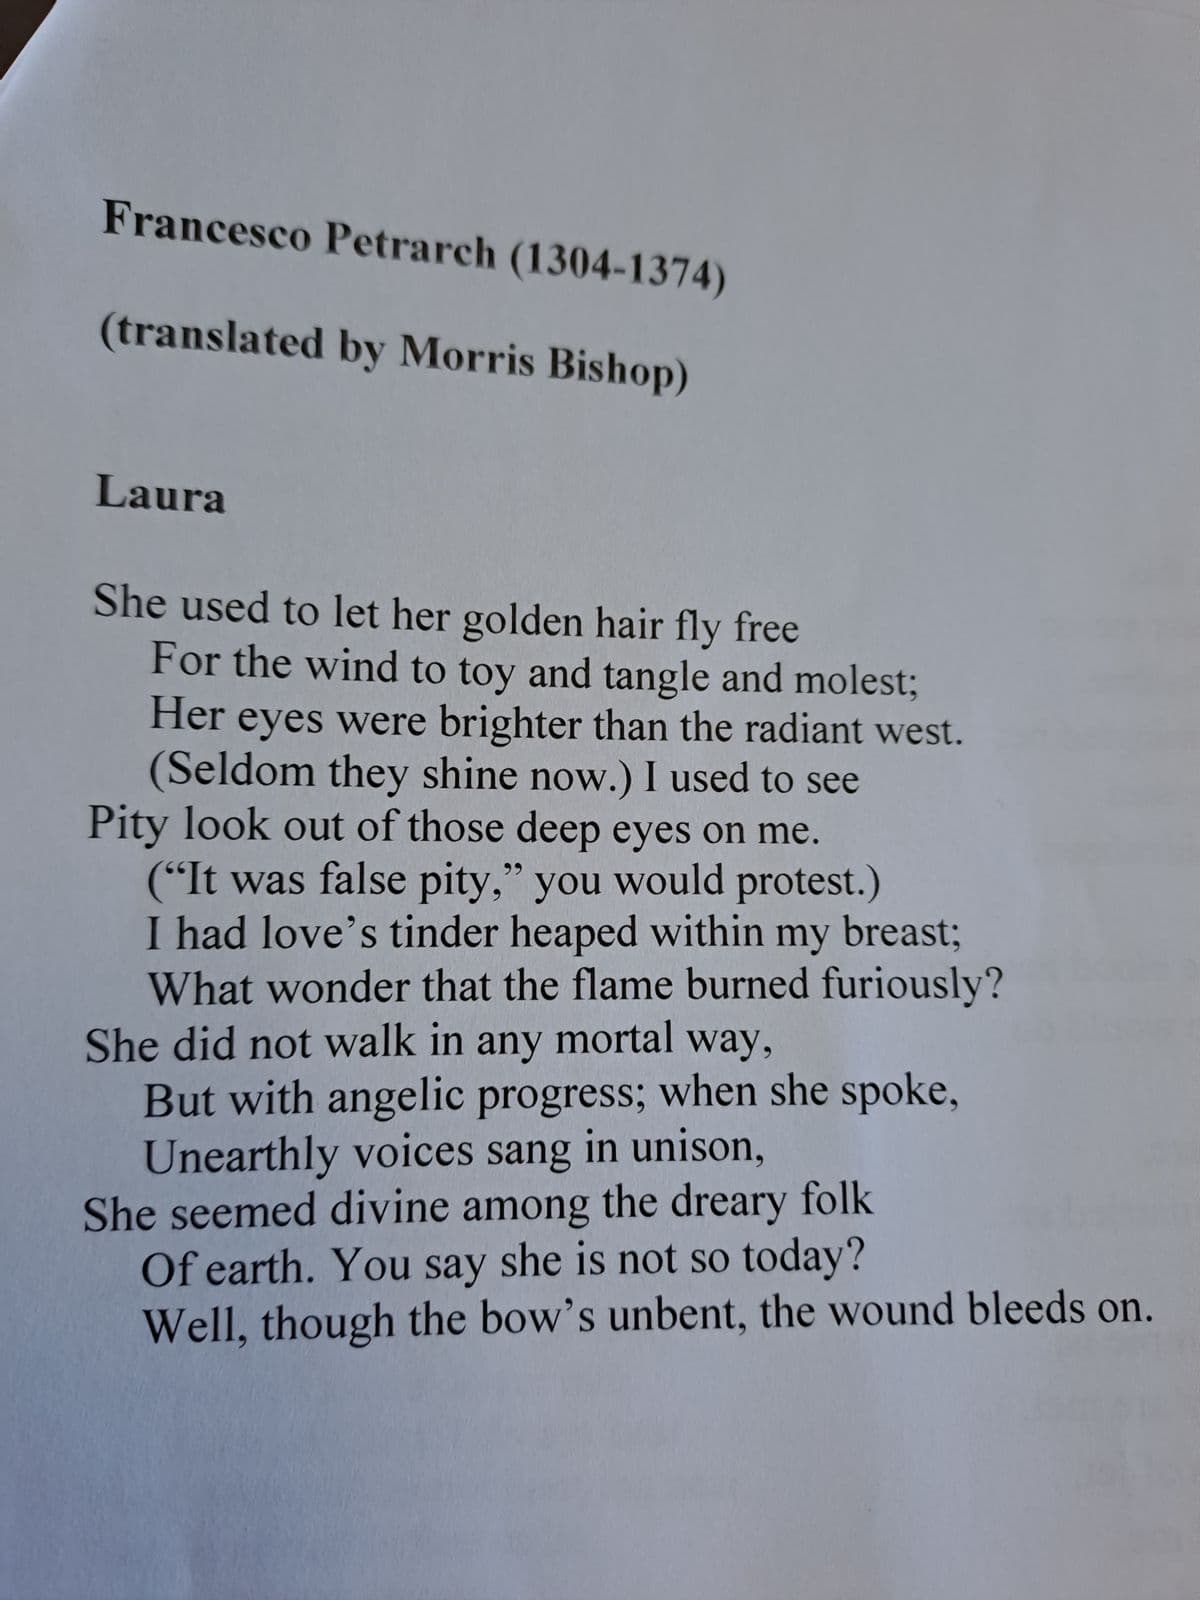 Francesco Petrarch (1304-1374)
(translated by Morris Bishop)
Laura
She used to let her golden hair fly free
For the wind to toy and tangle and molest;
Her eyes were brighter than the radiant west.
(Seldom they shine now.) I used to see
Pity look out of those deep eyes on me.
("It was false pity," you would protest.)
I had love's tinder heaped within my breast;
What wonder that the flame burned furiously?
She did not walk in any mortal way,
But with angelic progress; when she spoke,
Unearthly voices sang in unison,
She seemed divine among the dreary folk
Of earth. You say she is not so today?
Well, though the bow's unbent, the wound bleeds on.